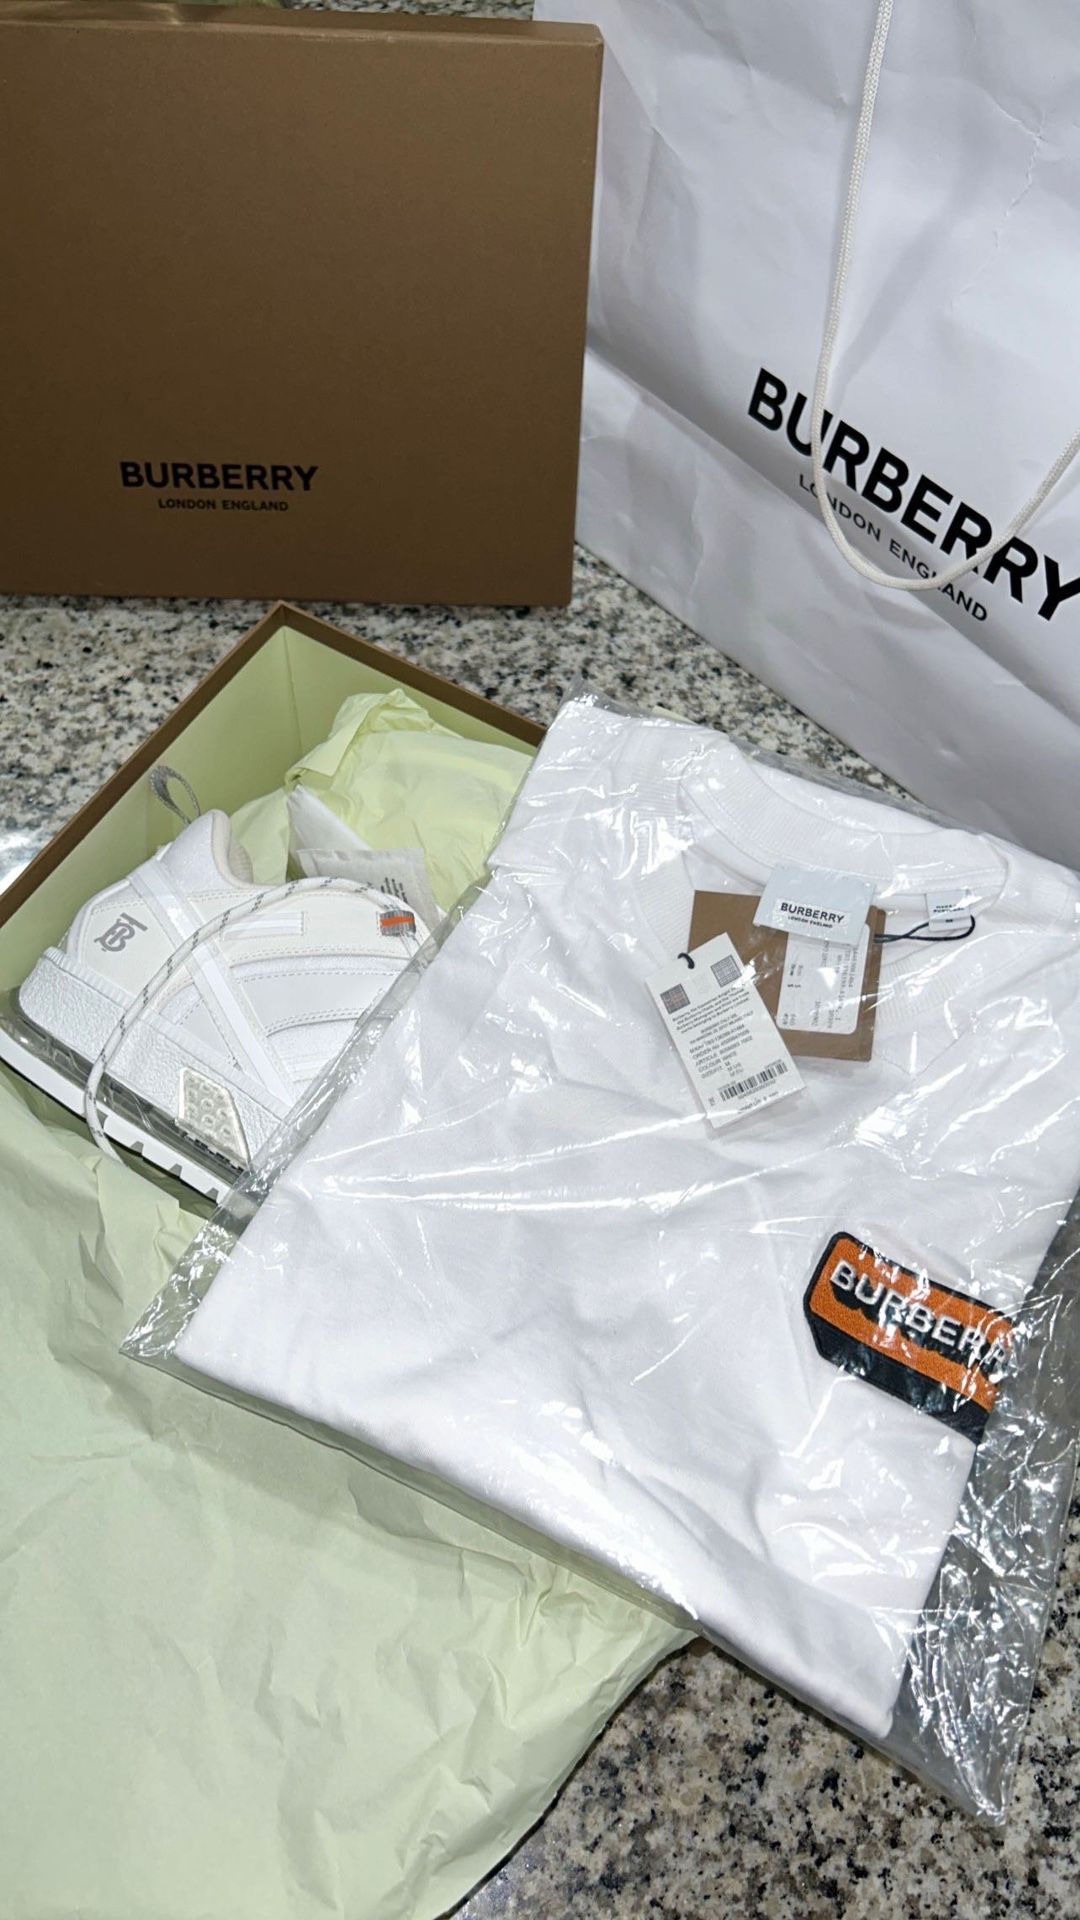 Brand New Authentic Medium Burberry Shirt And Size 42 Shoes To Match 